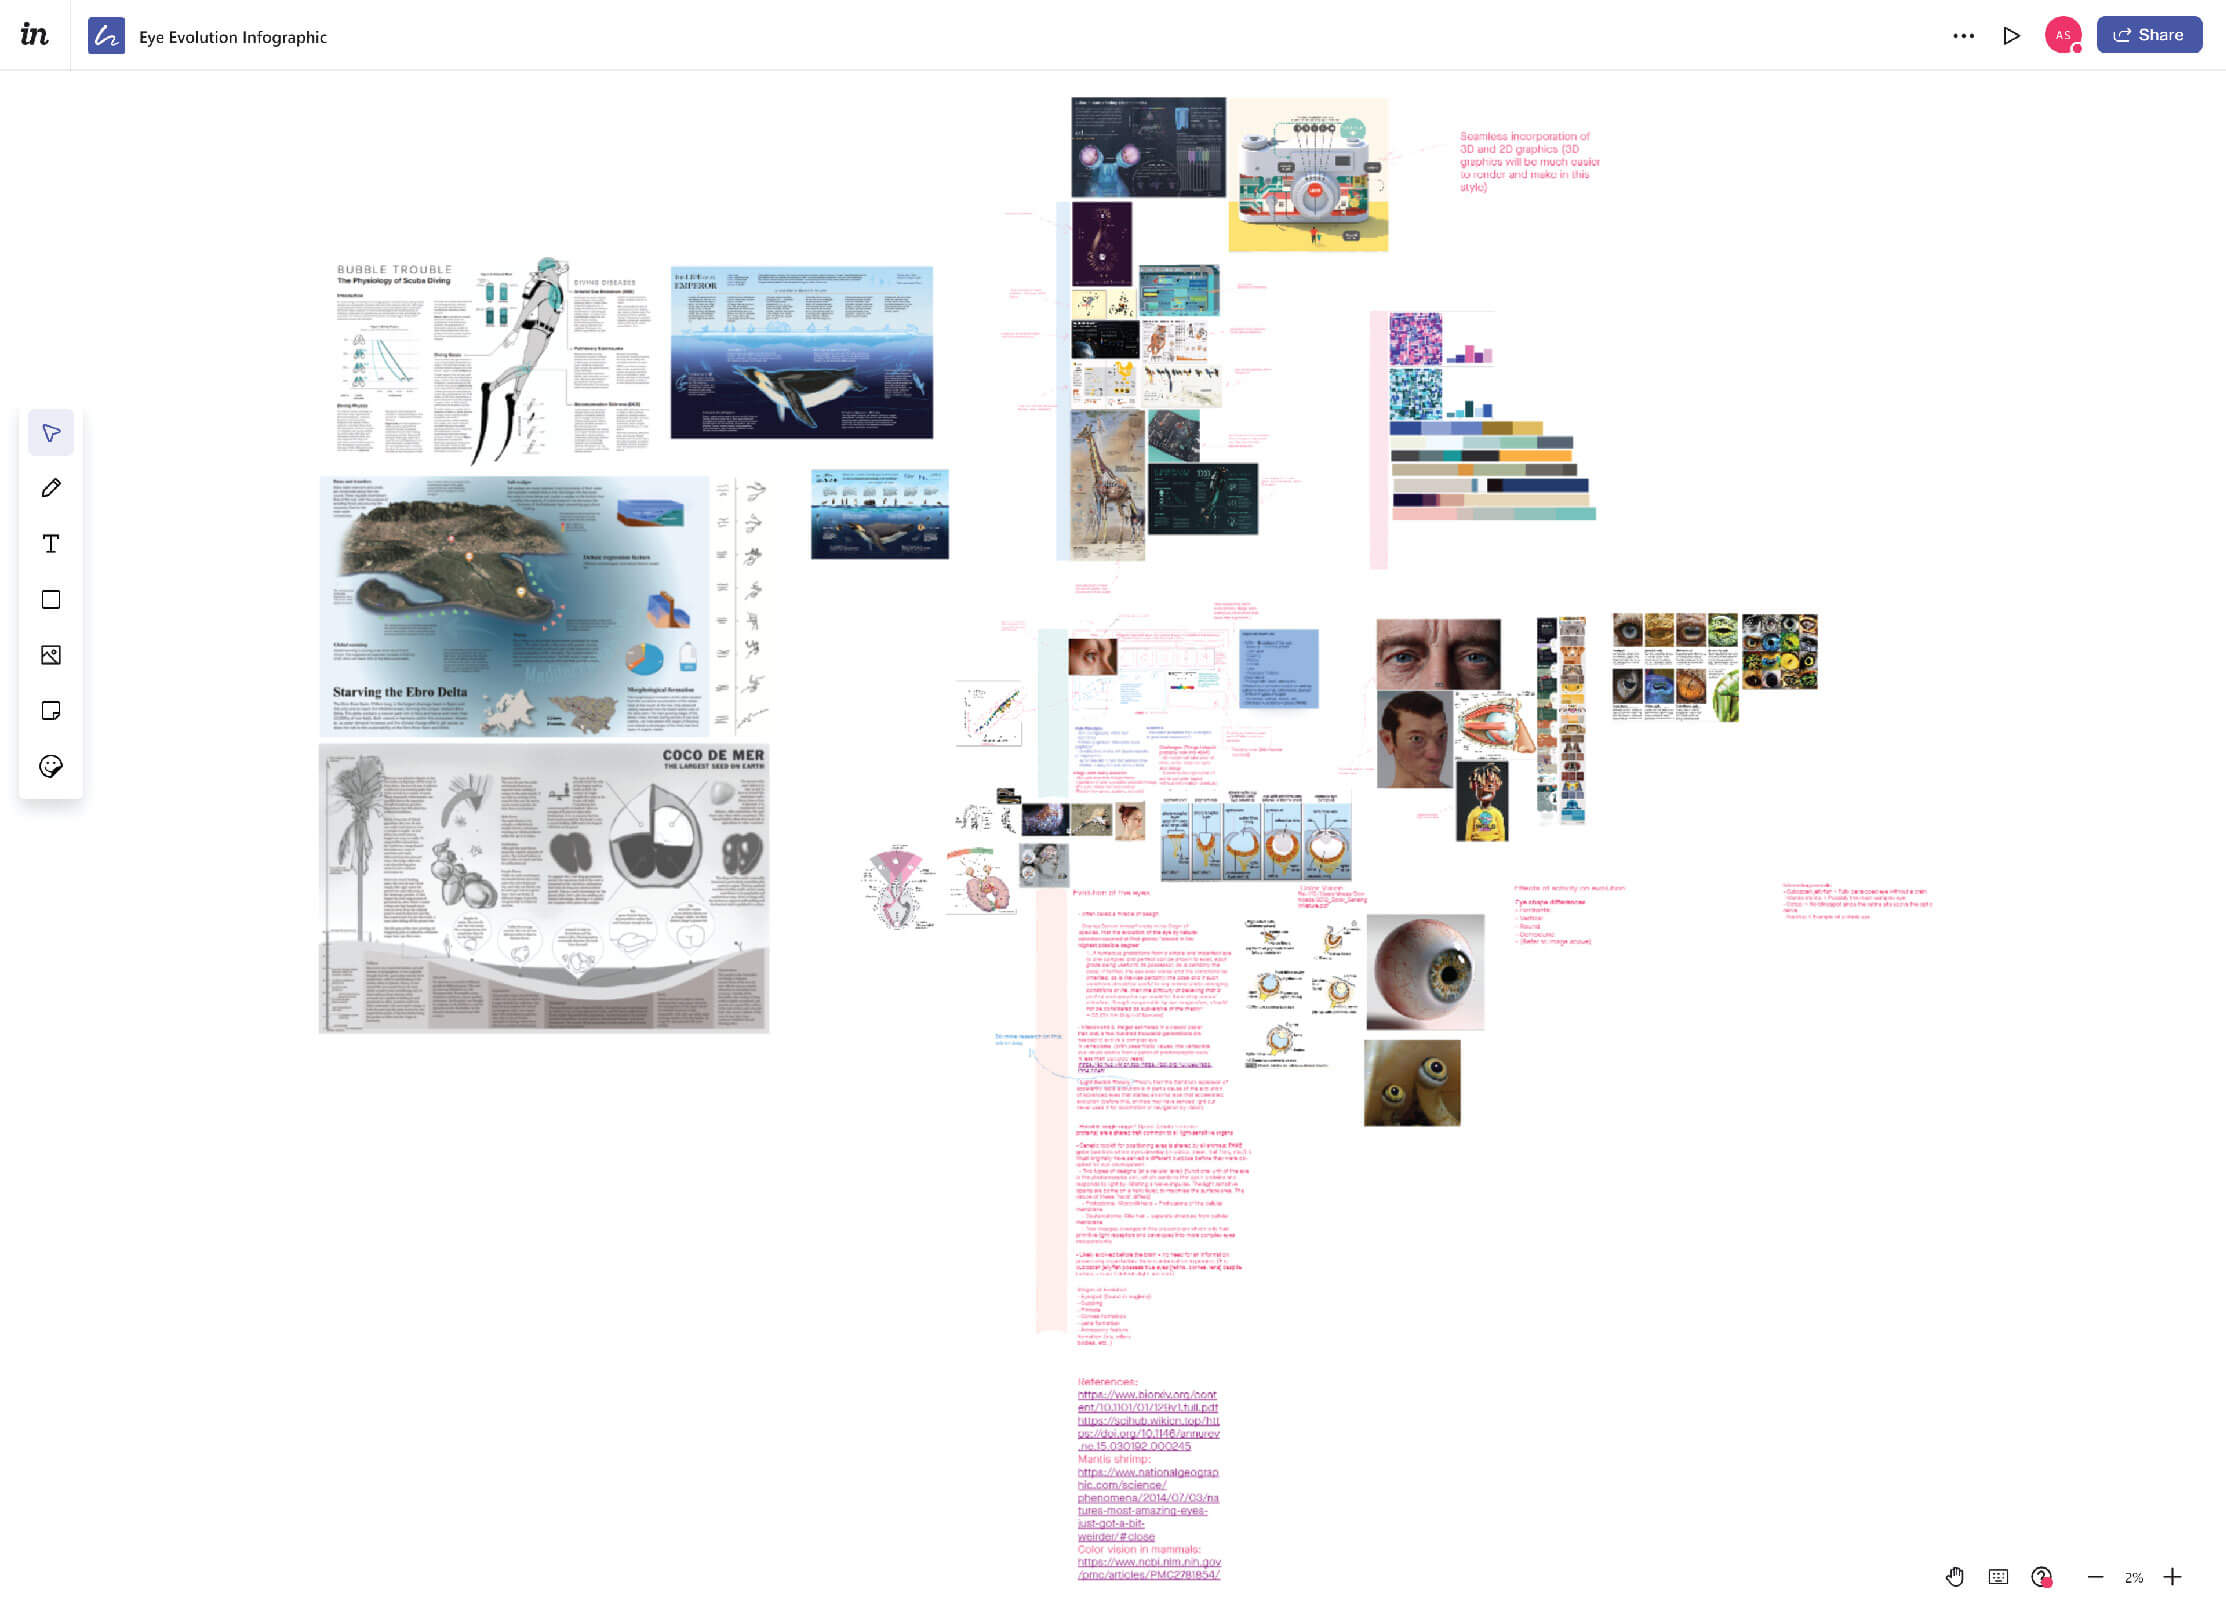 InVision board showing inspiration, and brainstorming